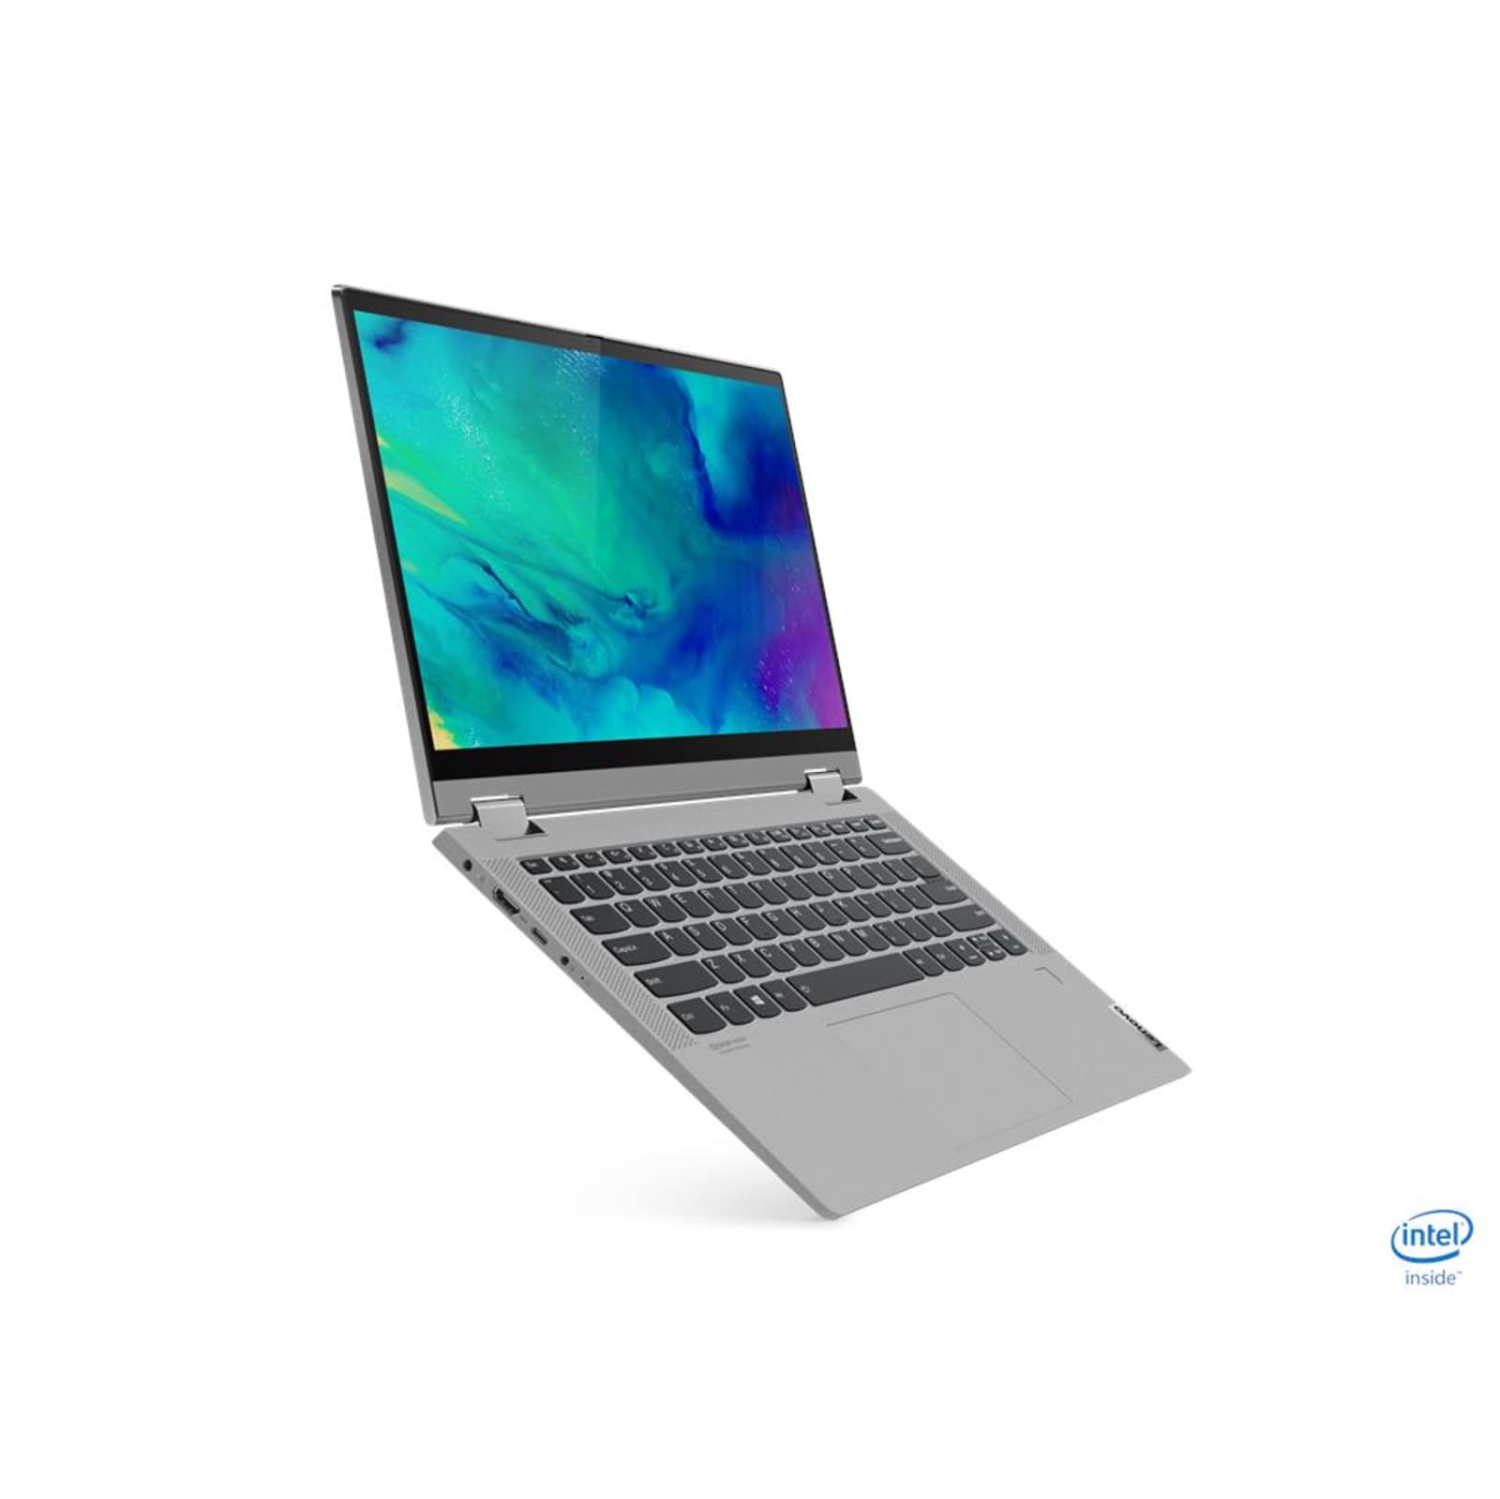 Refurbished (Excellent) Lenovo IdeaPad Flex 5 14ITL05 2-in-1 Laptop | 14" 1920x1080 FHD | Core i3-1115G4 - 128GB SSD Hard Drive - 8GB RAM | 2 cores @ 4.1 GHz Win 11 Home Silver